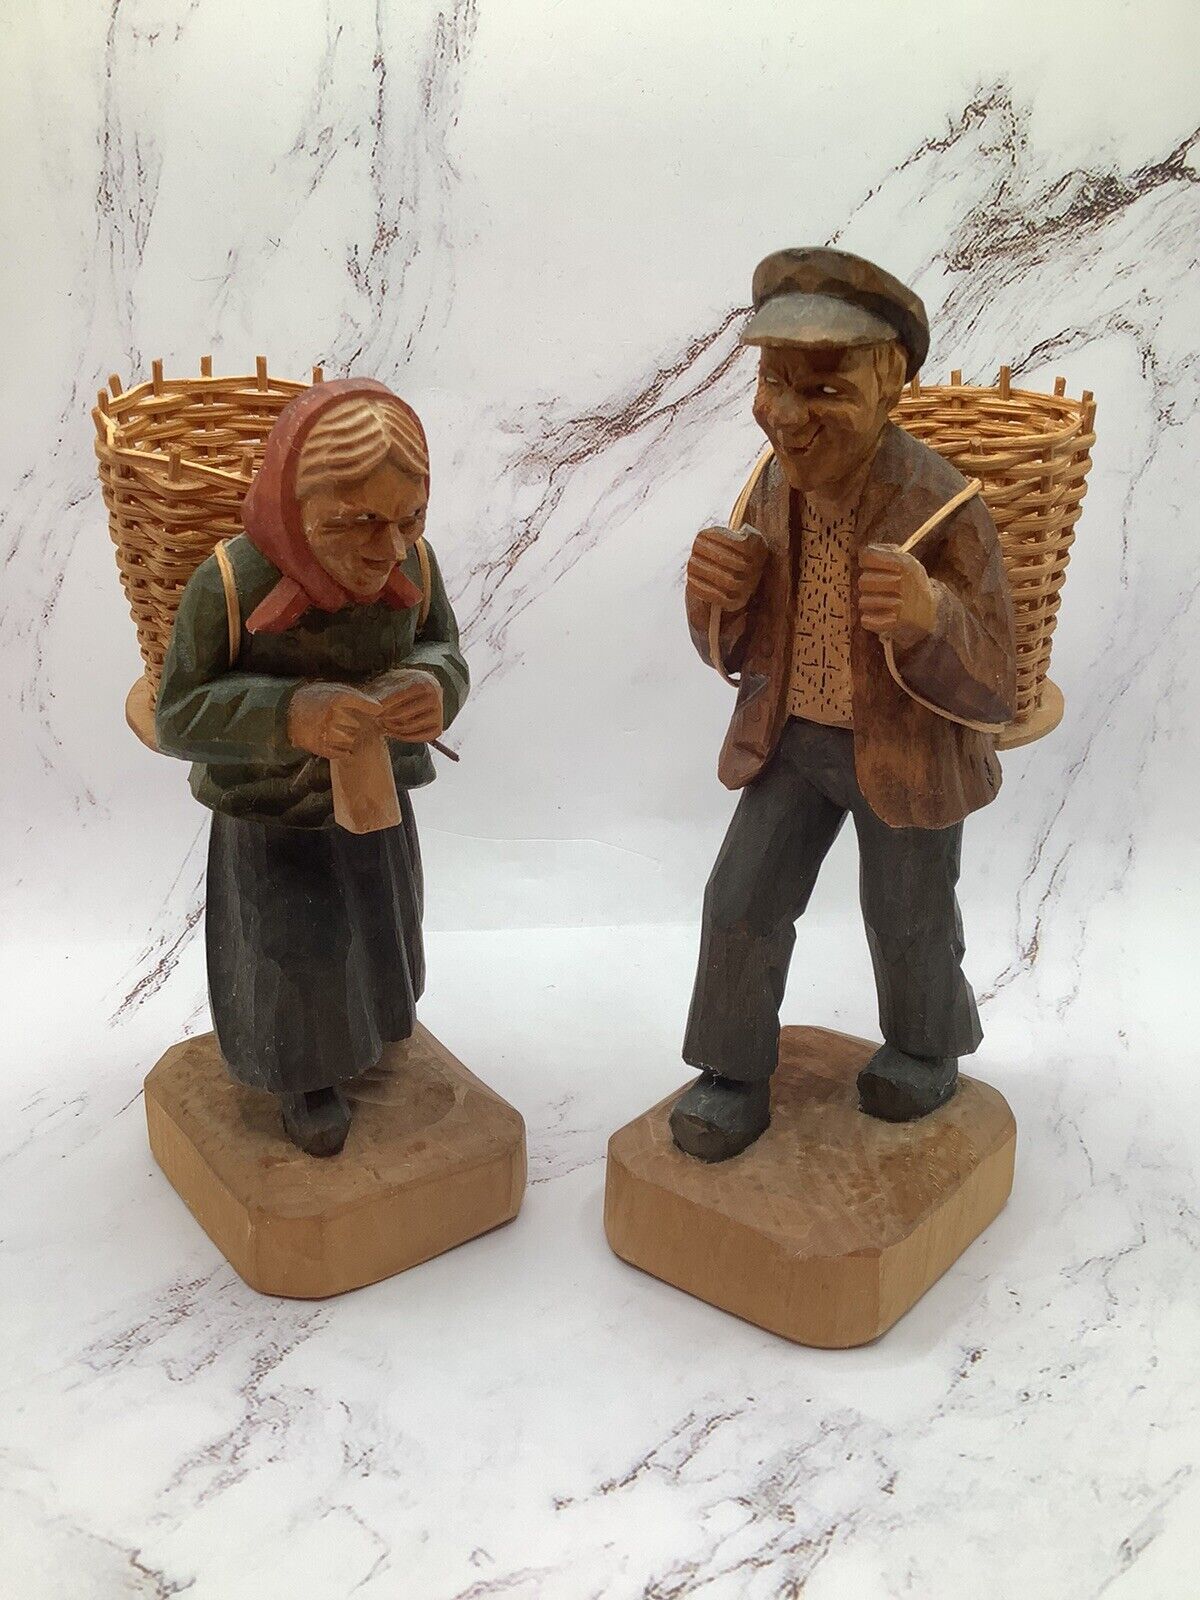 Vintage Norwegian Hand Carved Wooden Figurines With Hand Woven Baskets 6” H